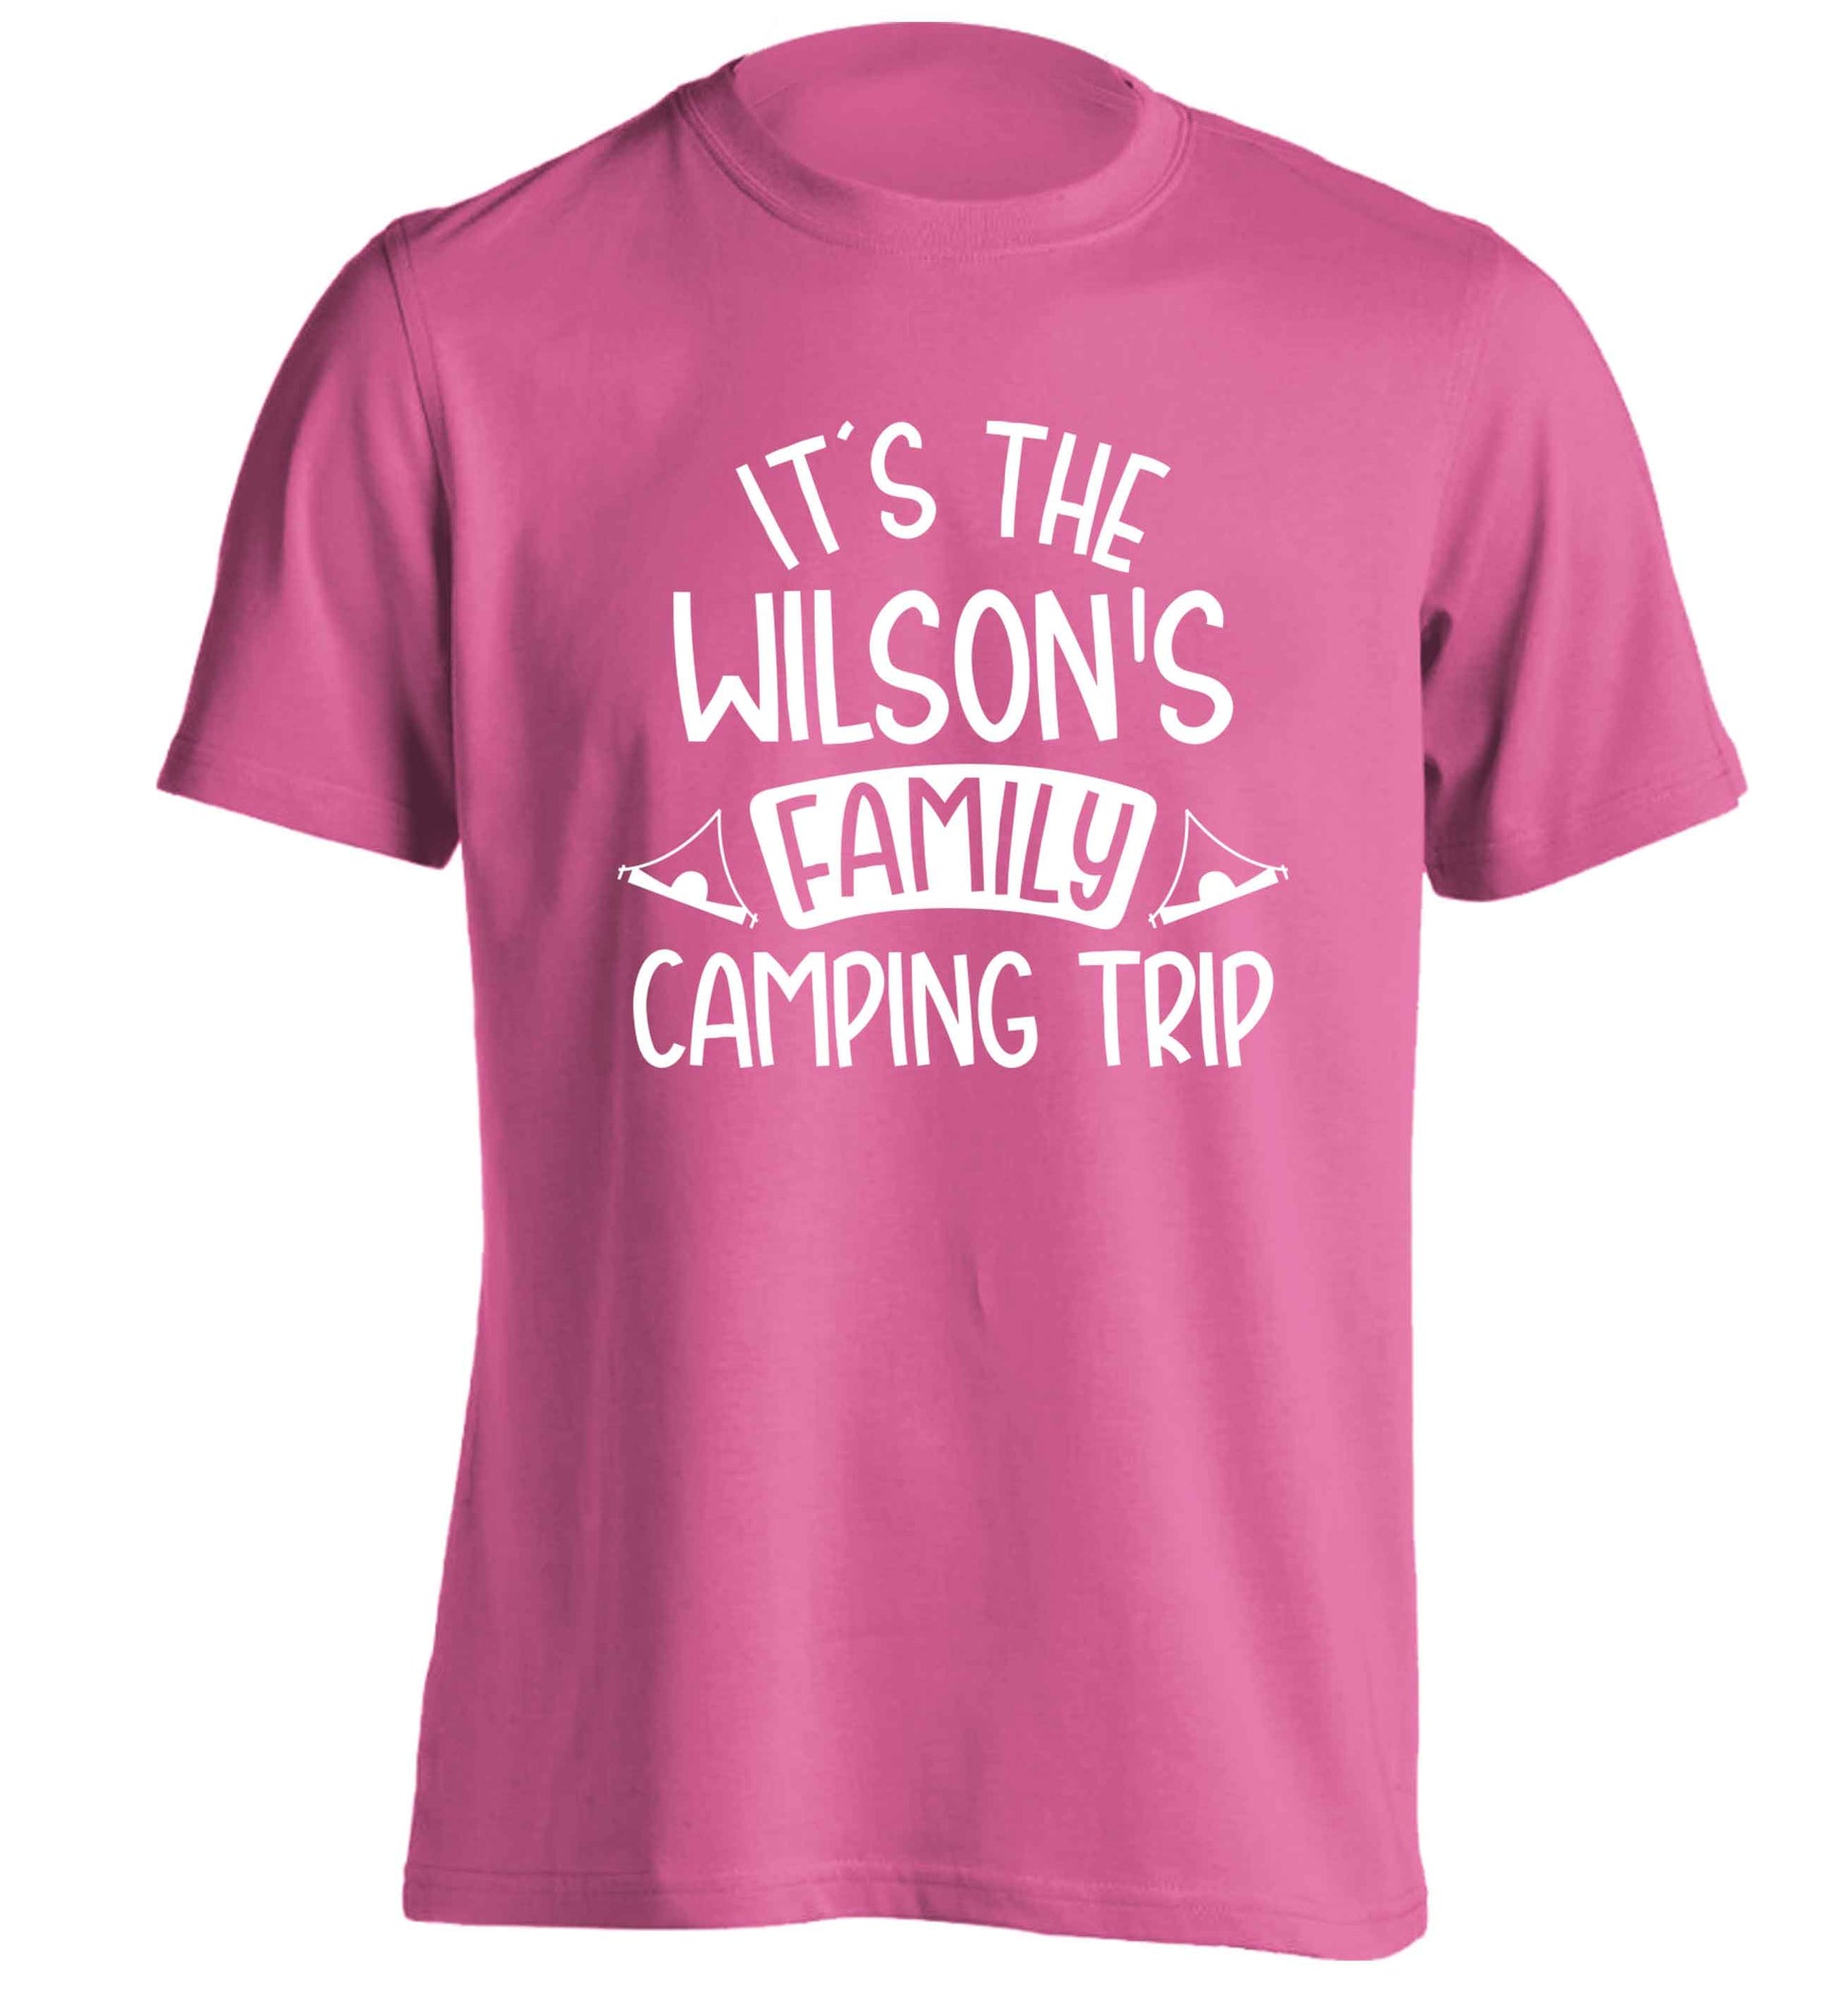 It's the Wilson's family camping trip personalised adults unisex pink Tshirt 2XL